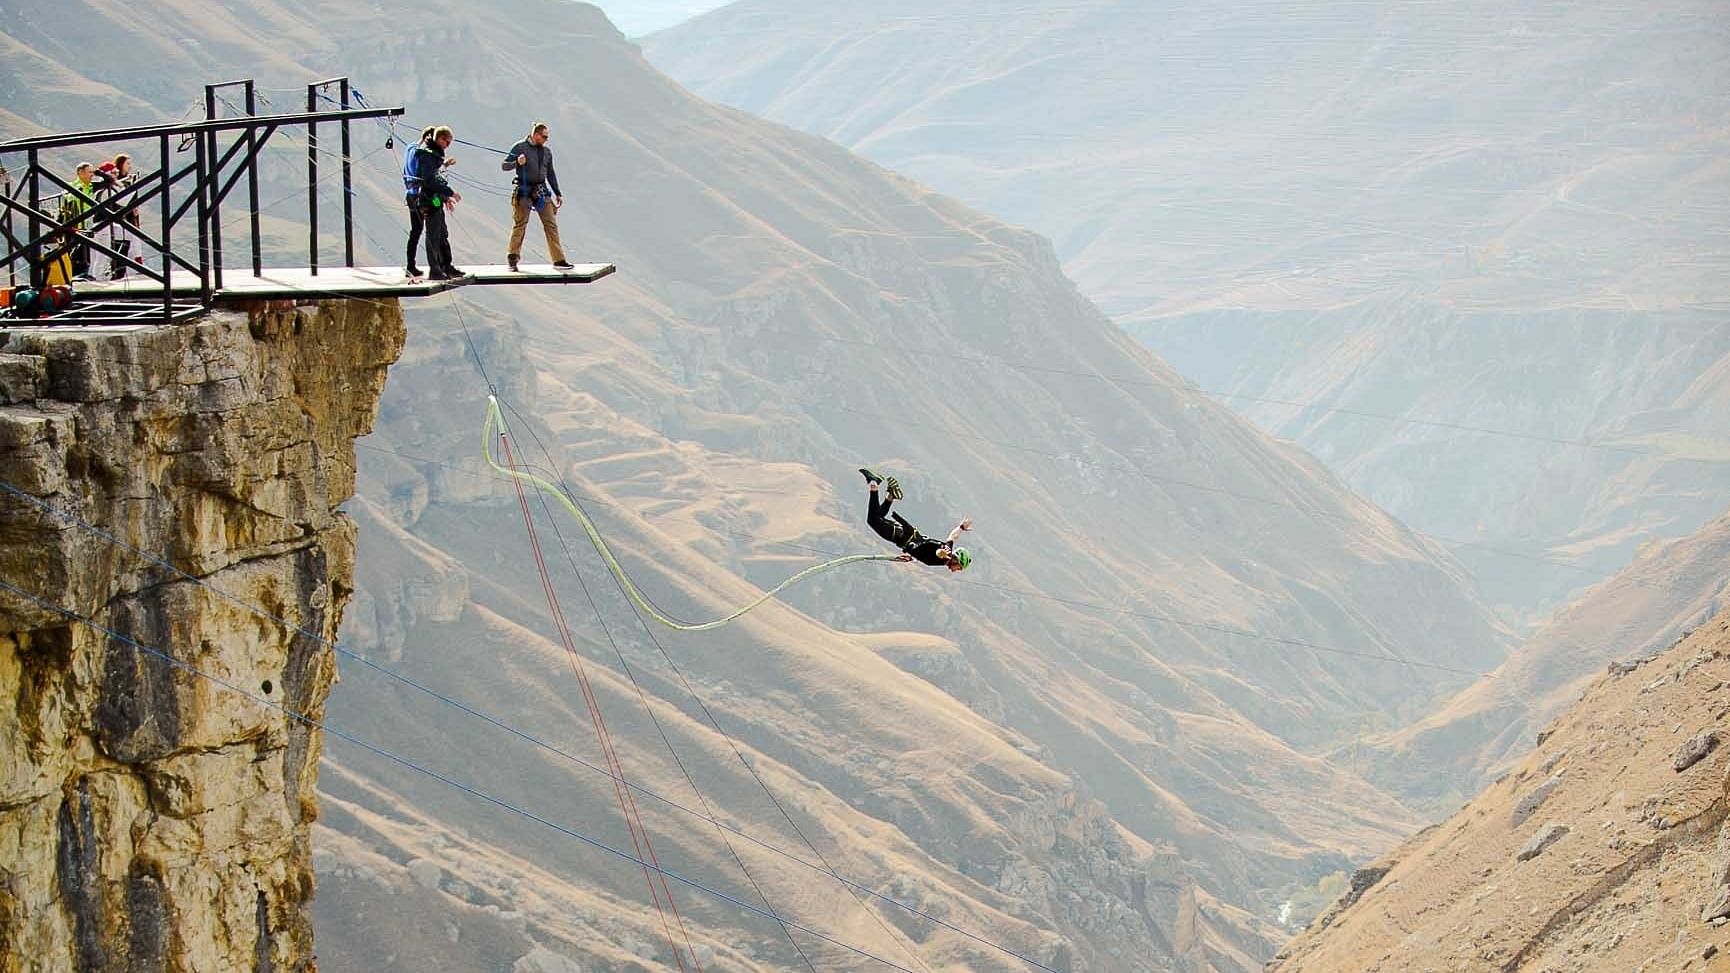 While you plan bungy jumping, keep these points in mind, Lifestyle Health